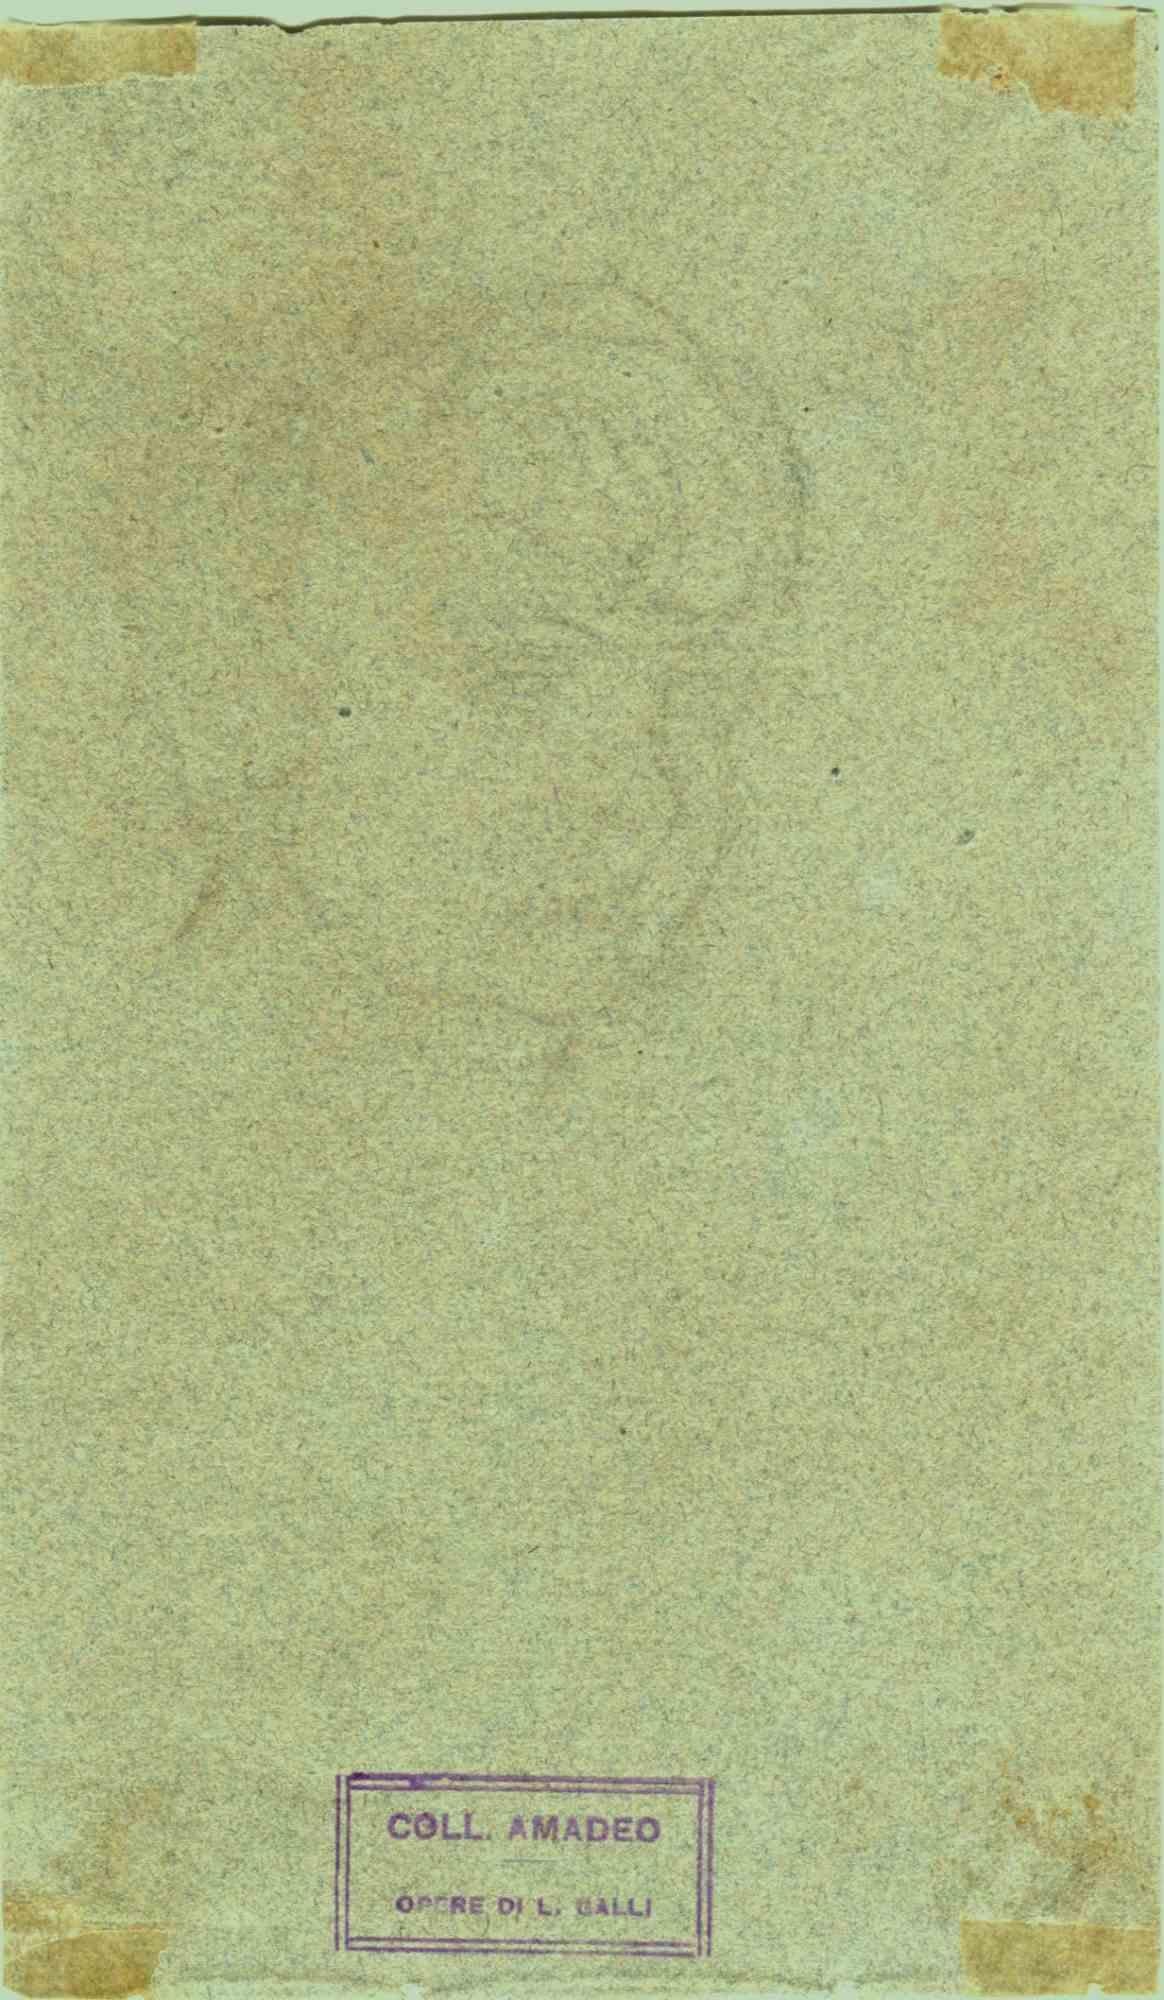 The Portrait is an original drawing realized by Luigi Galli (1820-1906) in the late 19th Century.

Stamped," Coll. Amadeo"

Good conditions but aged.

The artwork is depicted through soft strokes and perfect hatchings.